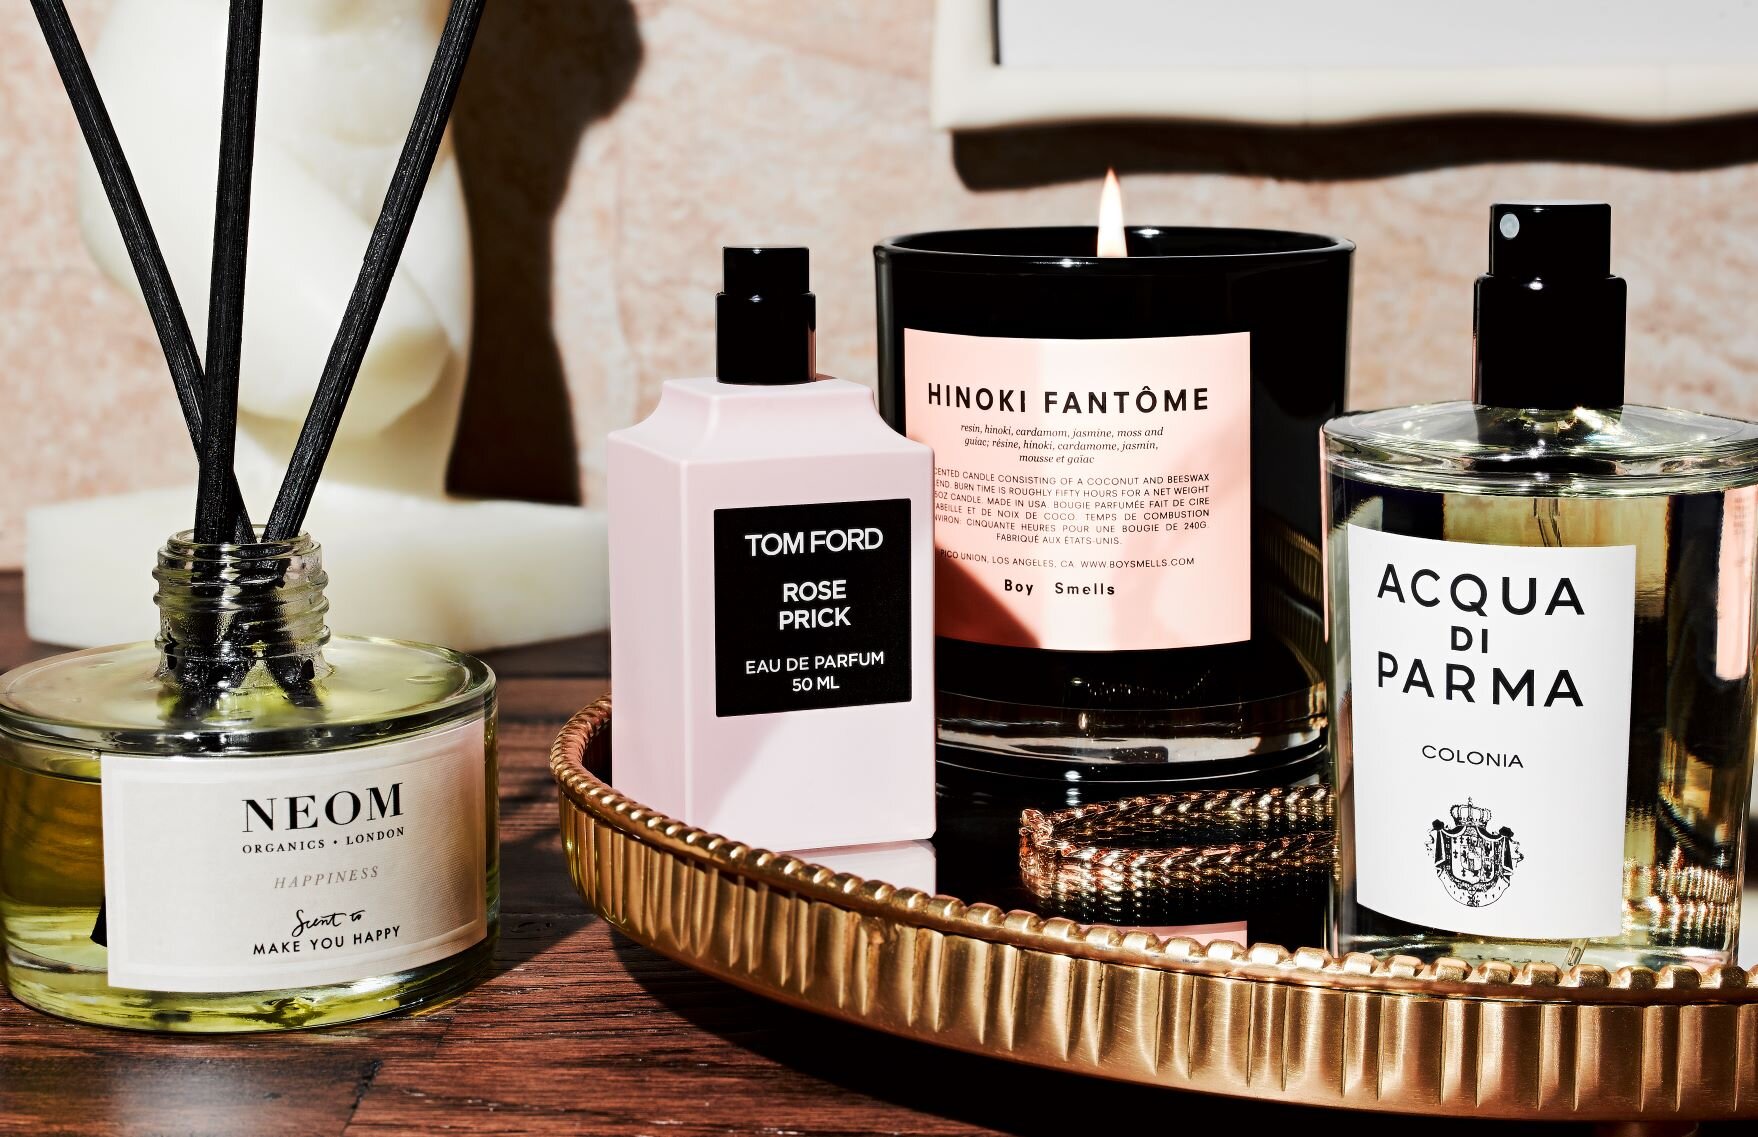 How To Buy Fragrance For Notoriously Tricky People | Space NK